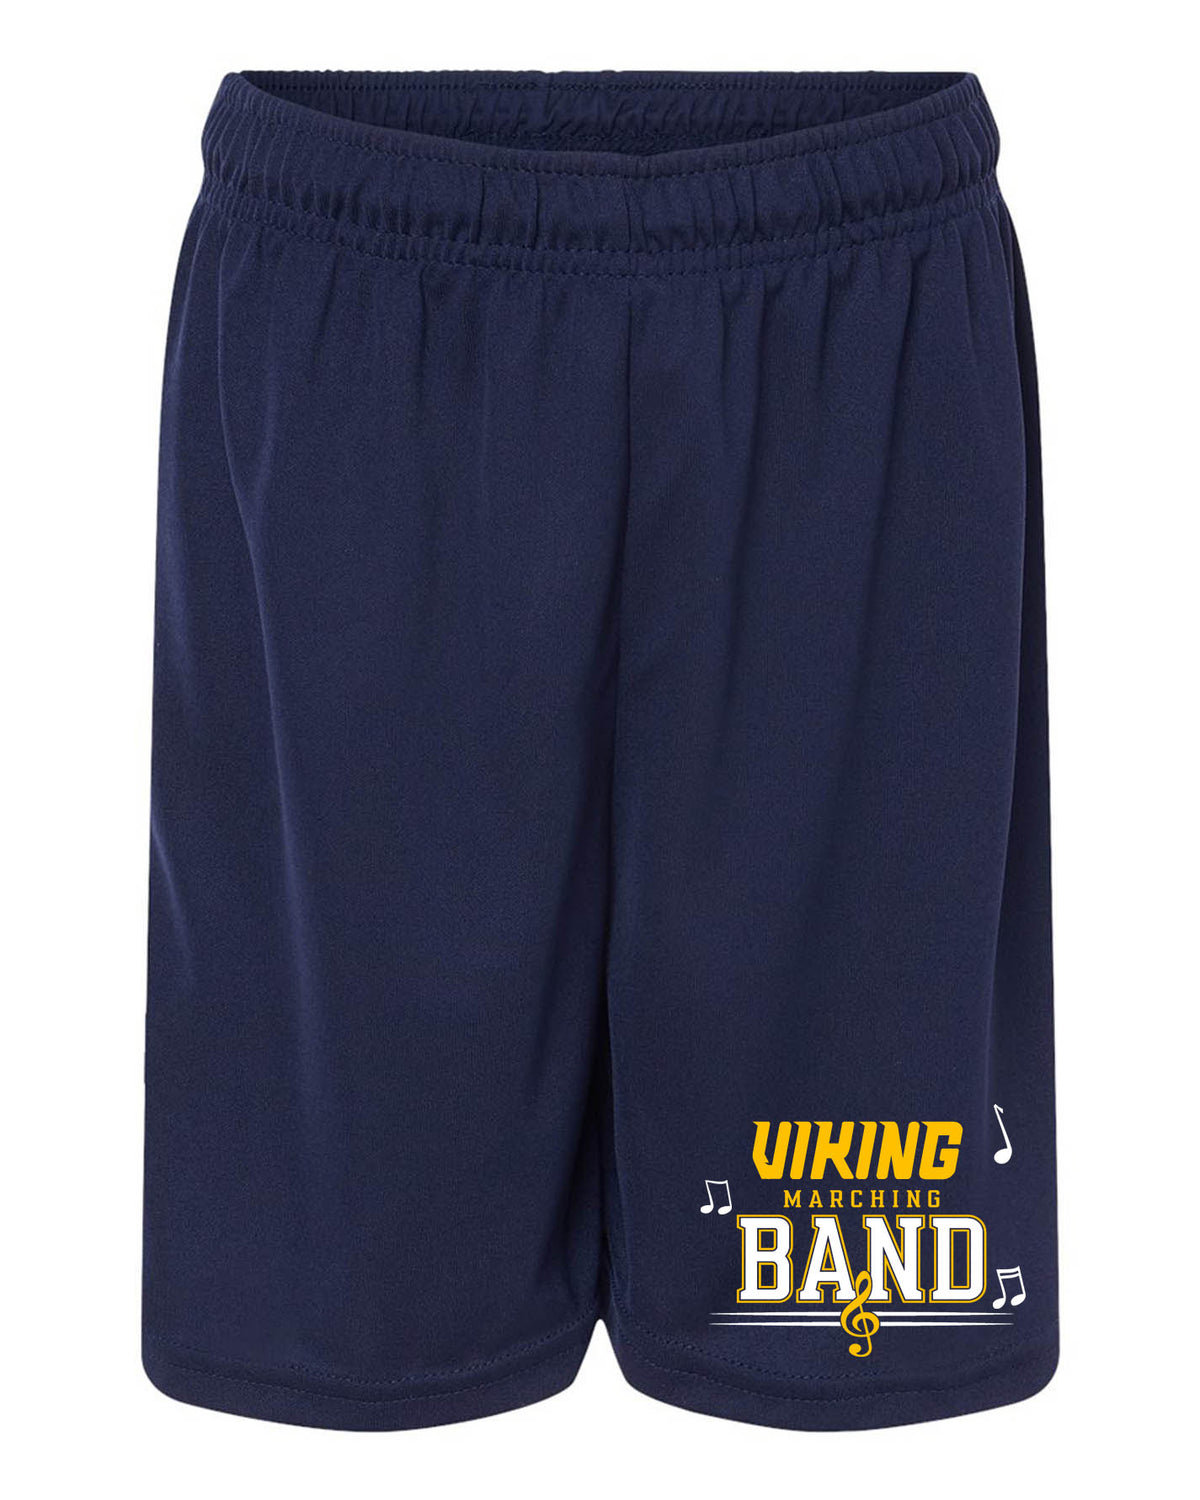 Vernon Marching Band Performance Shorts Design 5